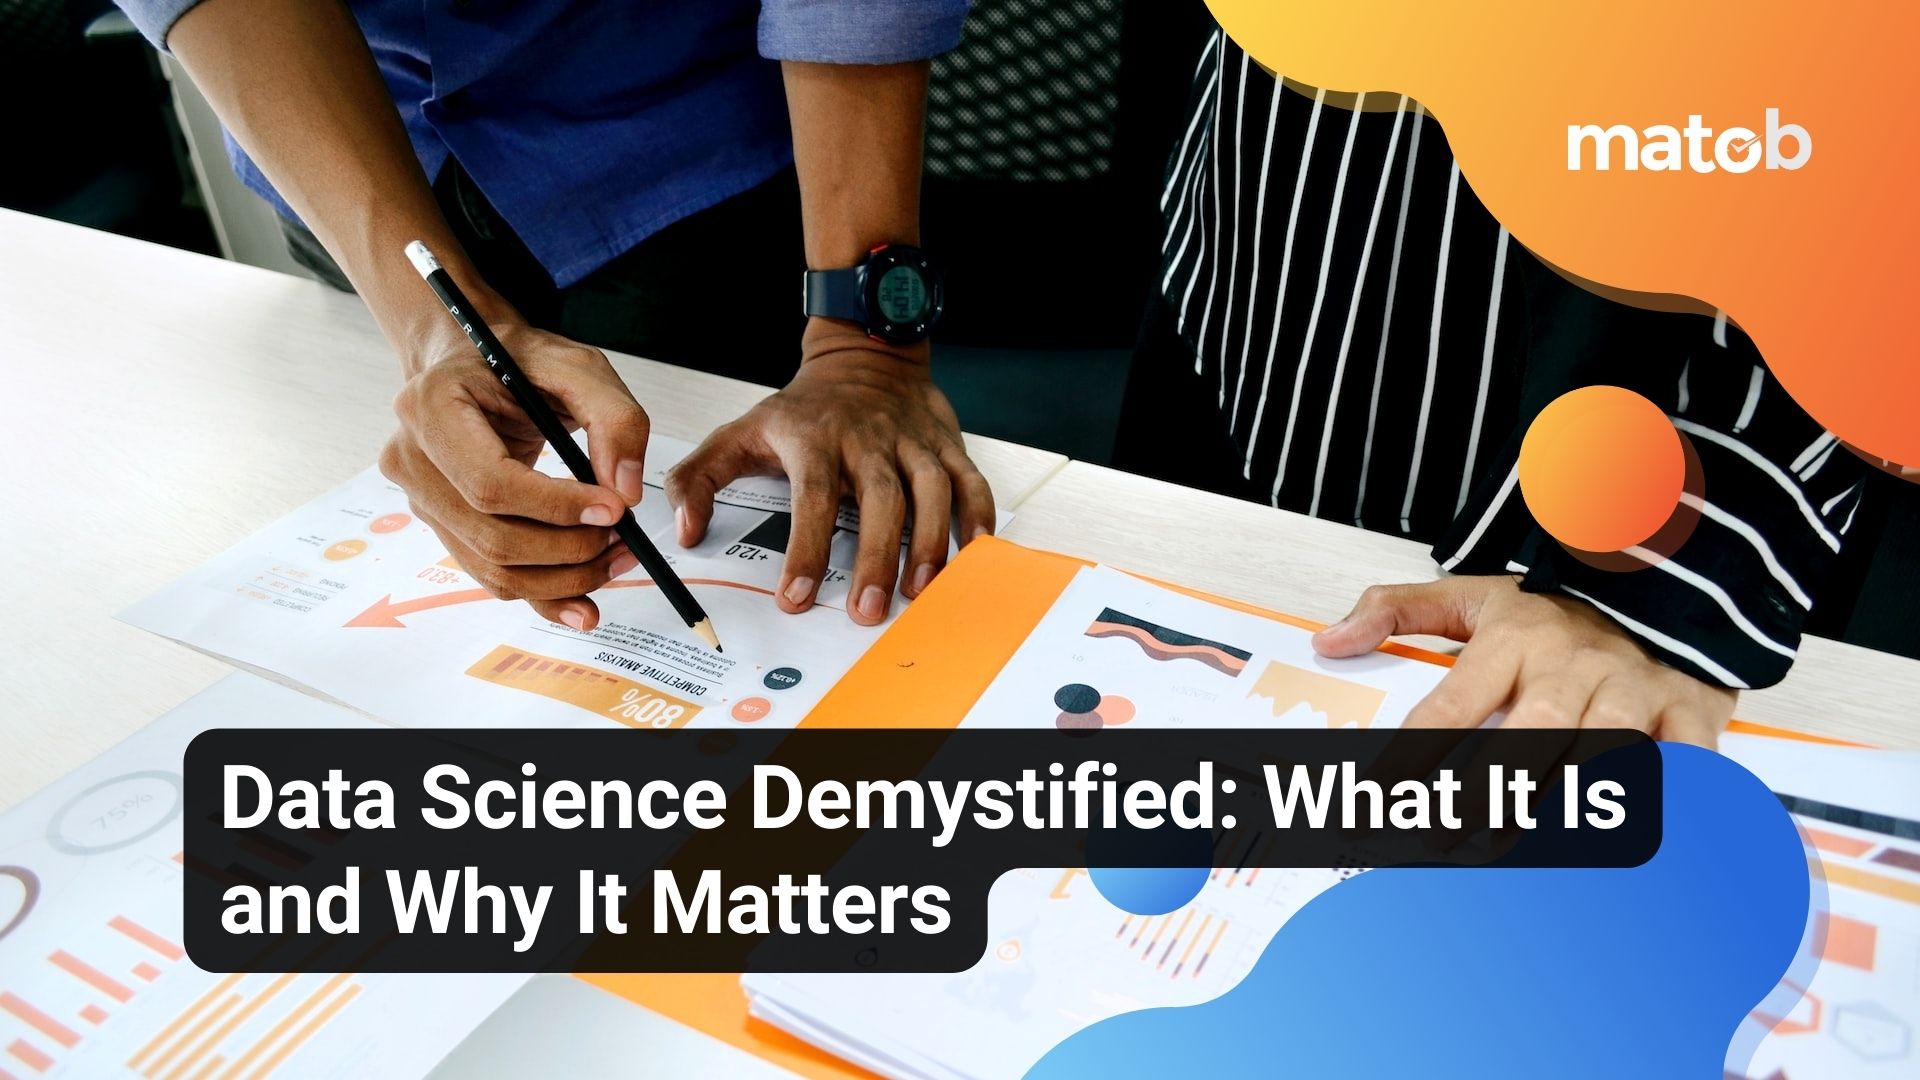 Data Science Demystified: What It Is and Why It Matters